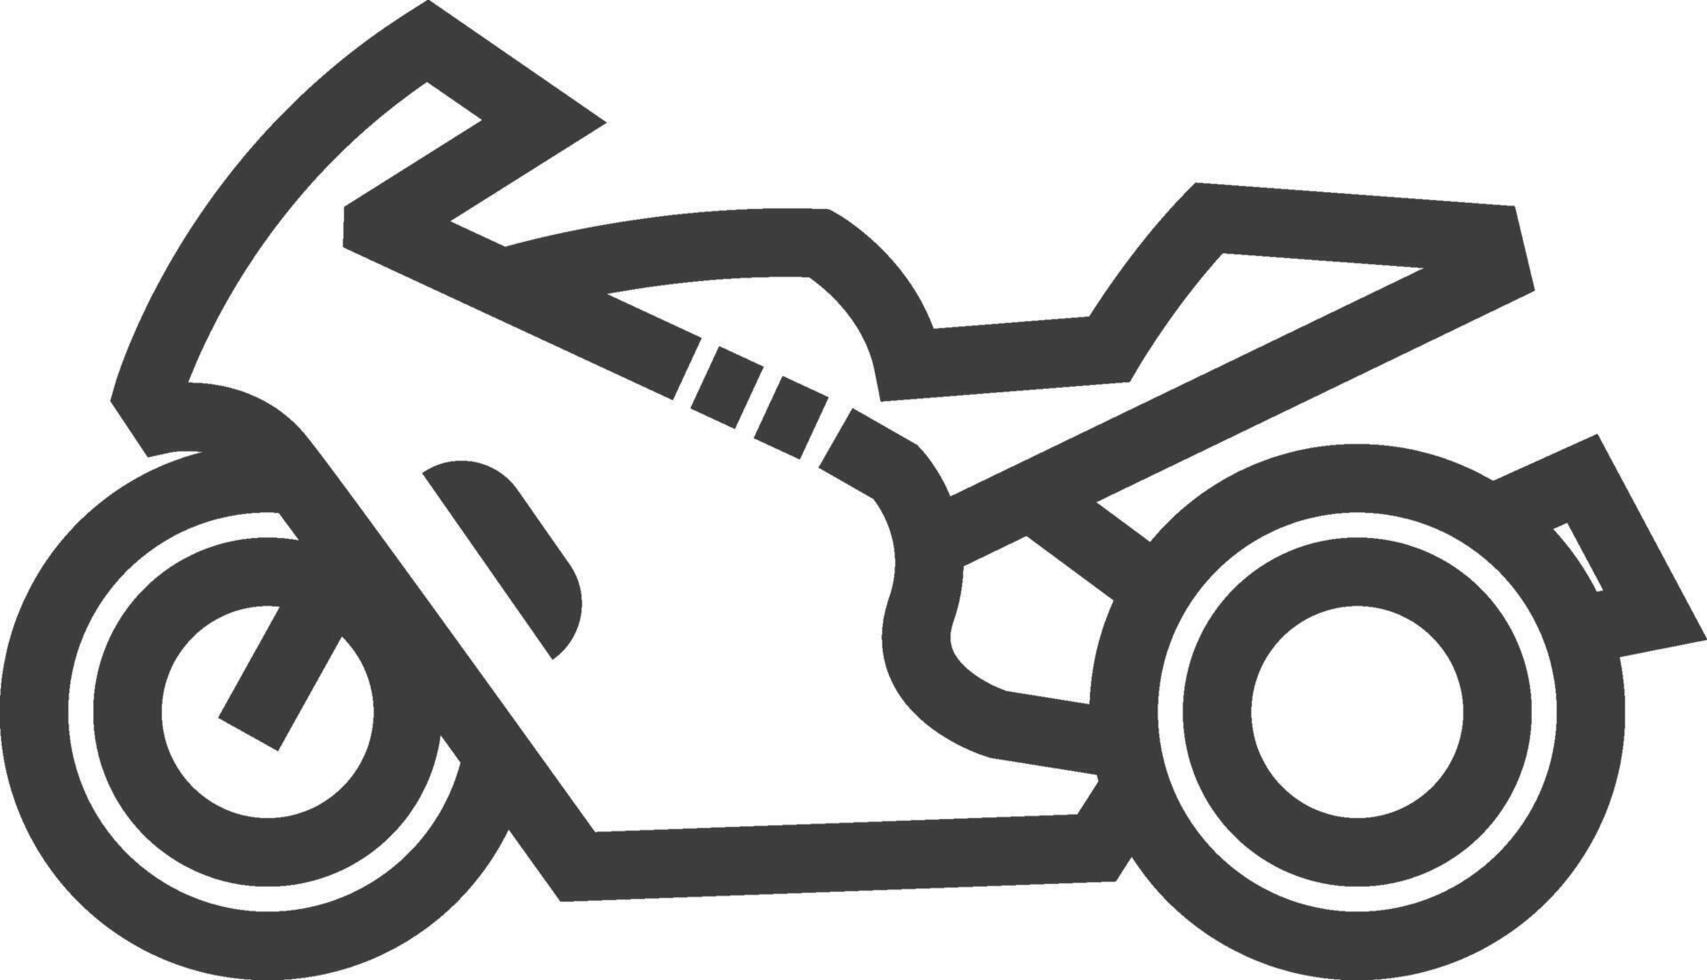 Motorcycle icon in thick outline style. Black and white monochrome vector illustration.